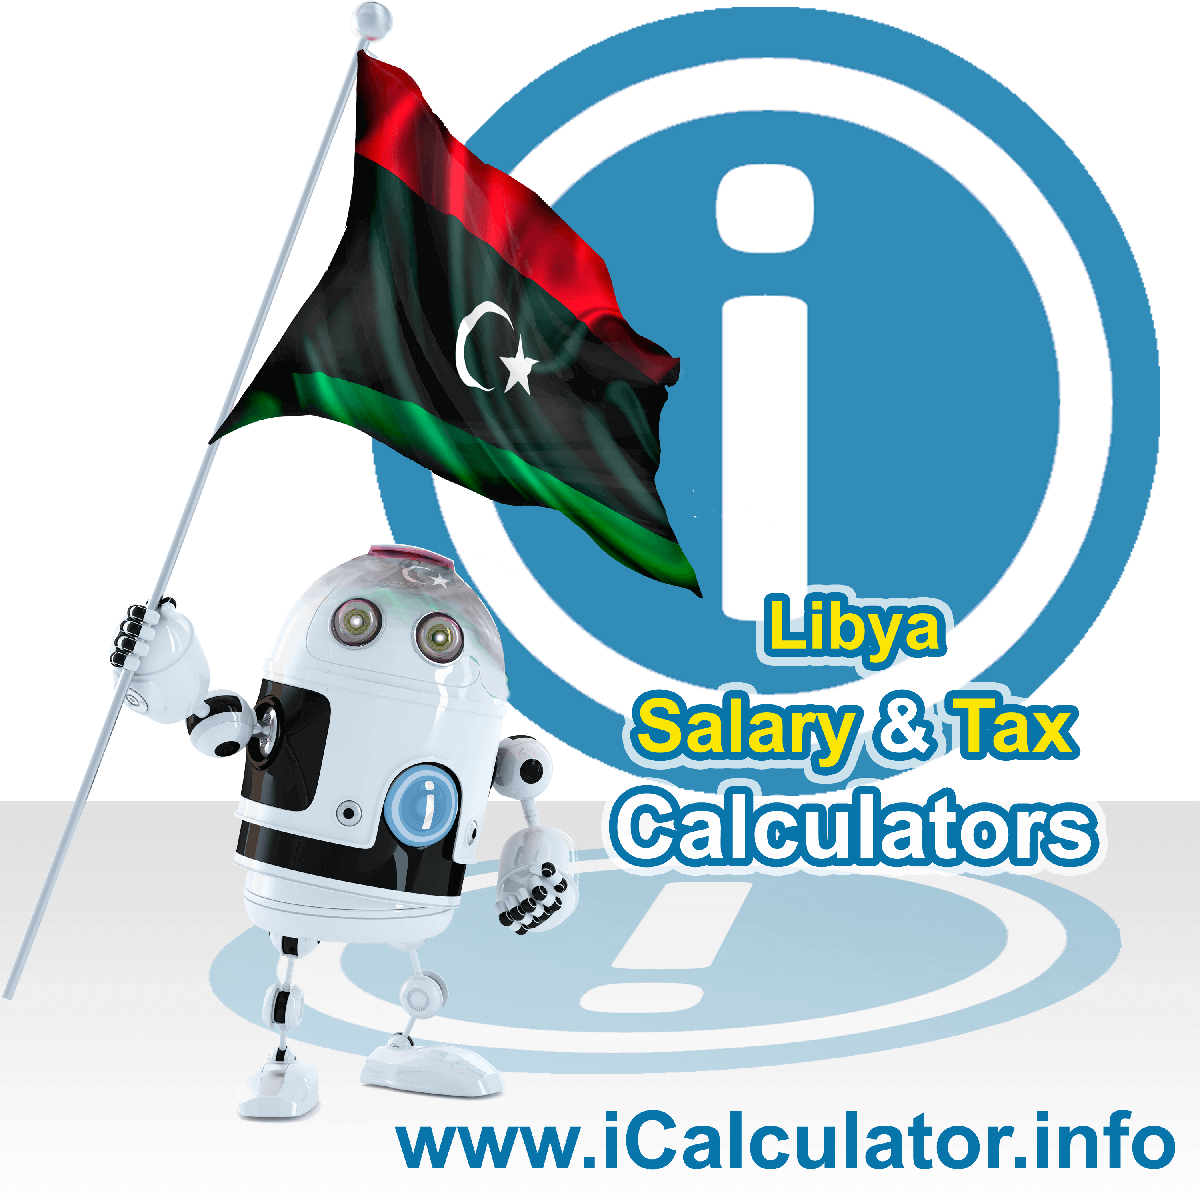 Libya Wage Calculator. This image shows the Libya flag and information relating to the tax formula for the Libya Tax Calculator